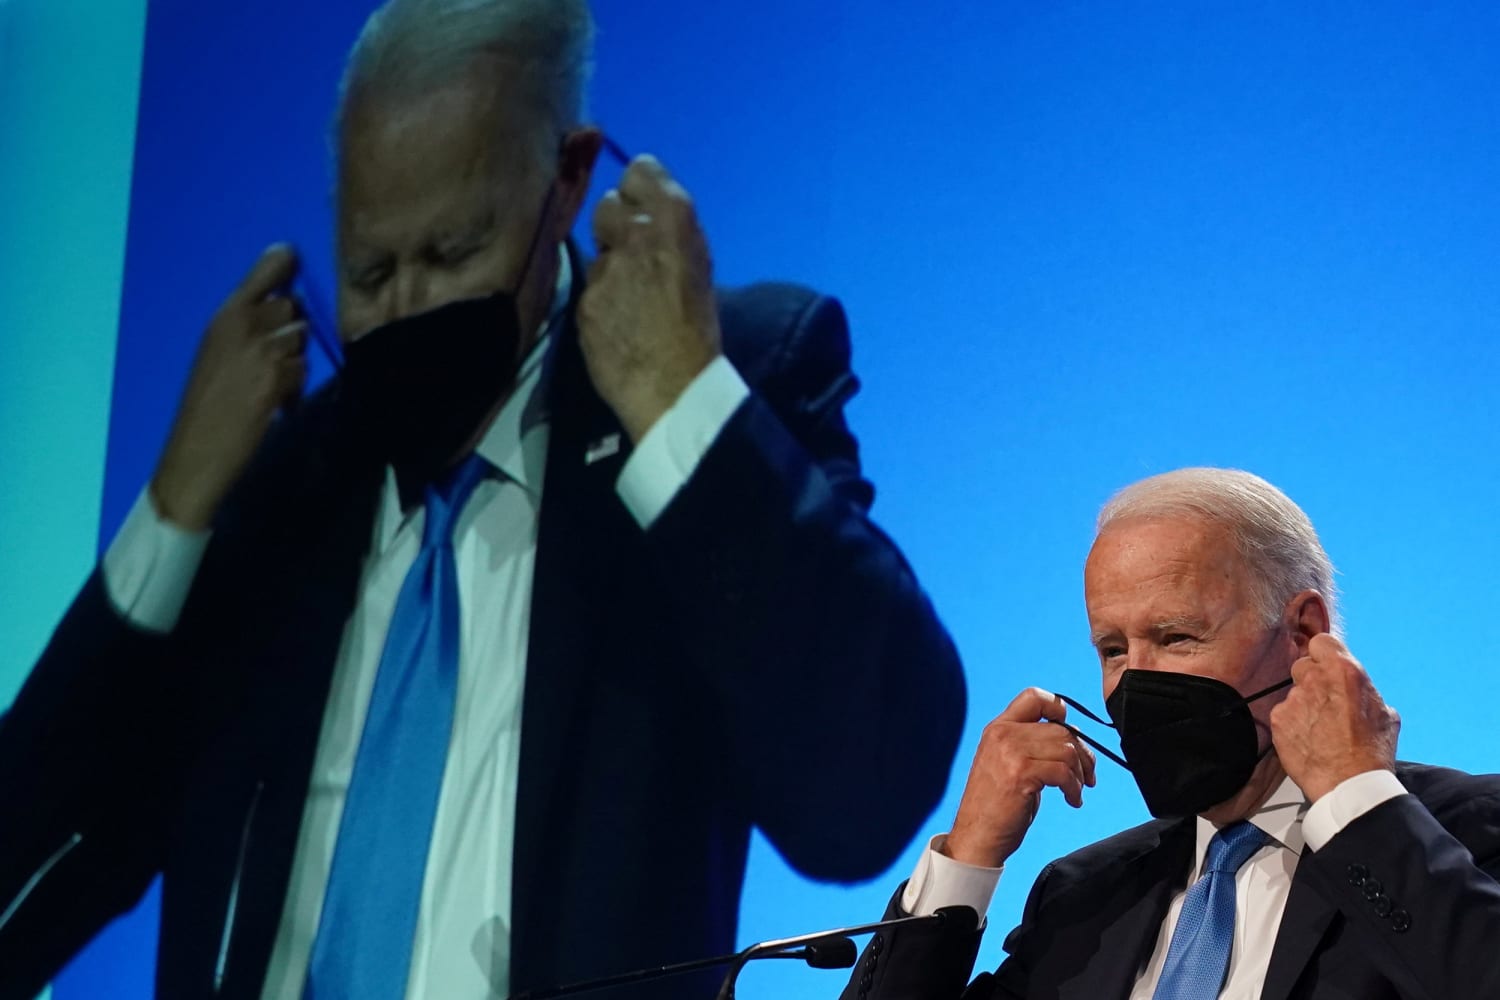 Why the right’s criticism of Biden’s Covid-19 response can’t be taken seriously